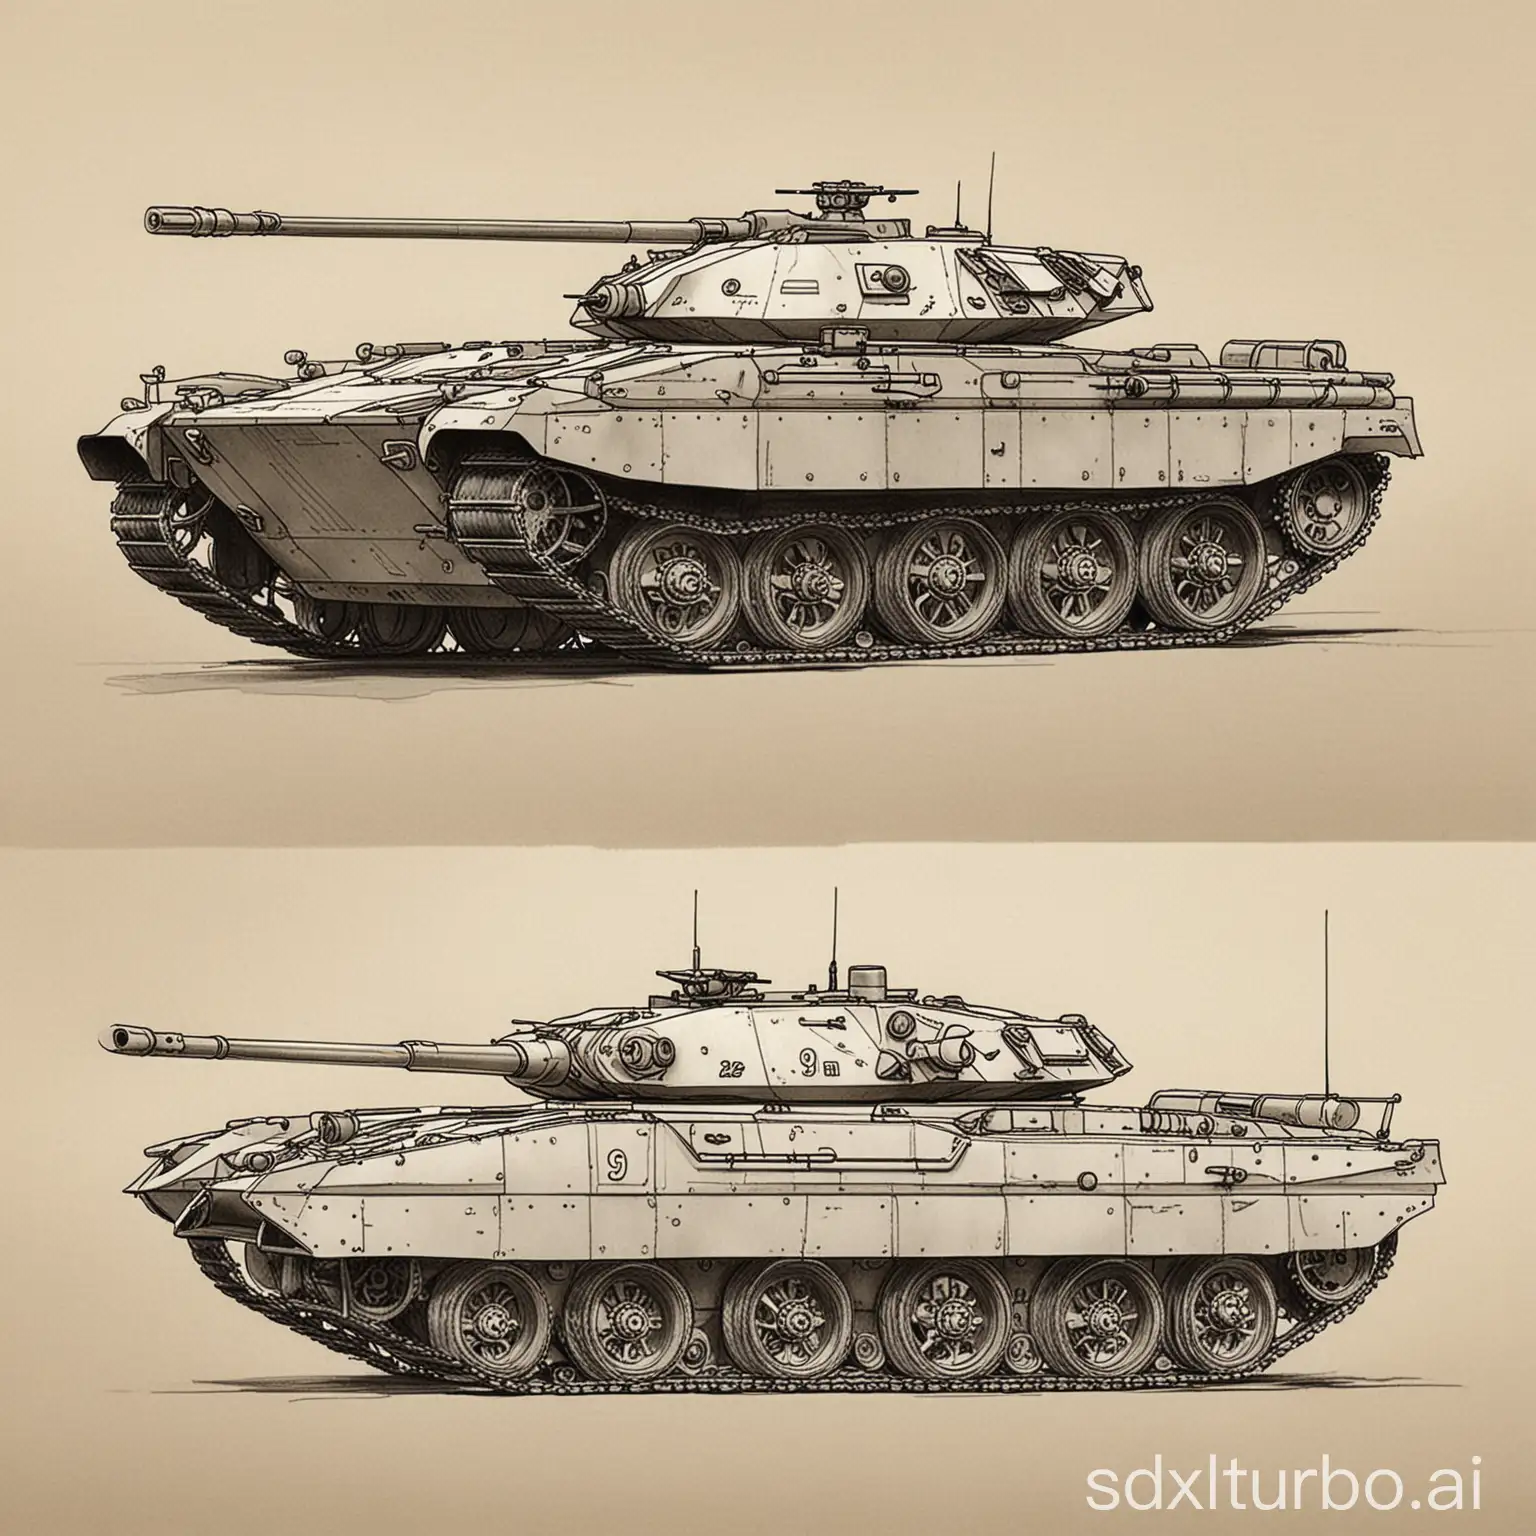 The outline of the Type 99 tank depicted in simple sketches is clear, demonstrating its sturdy and majestic image.